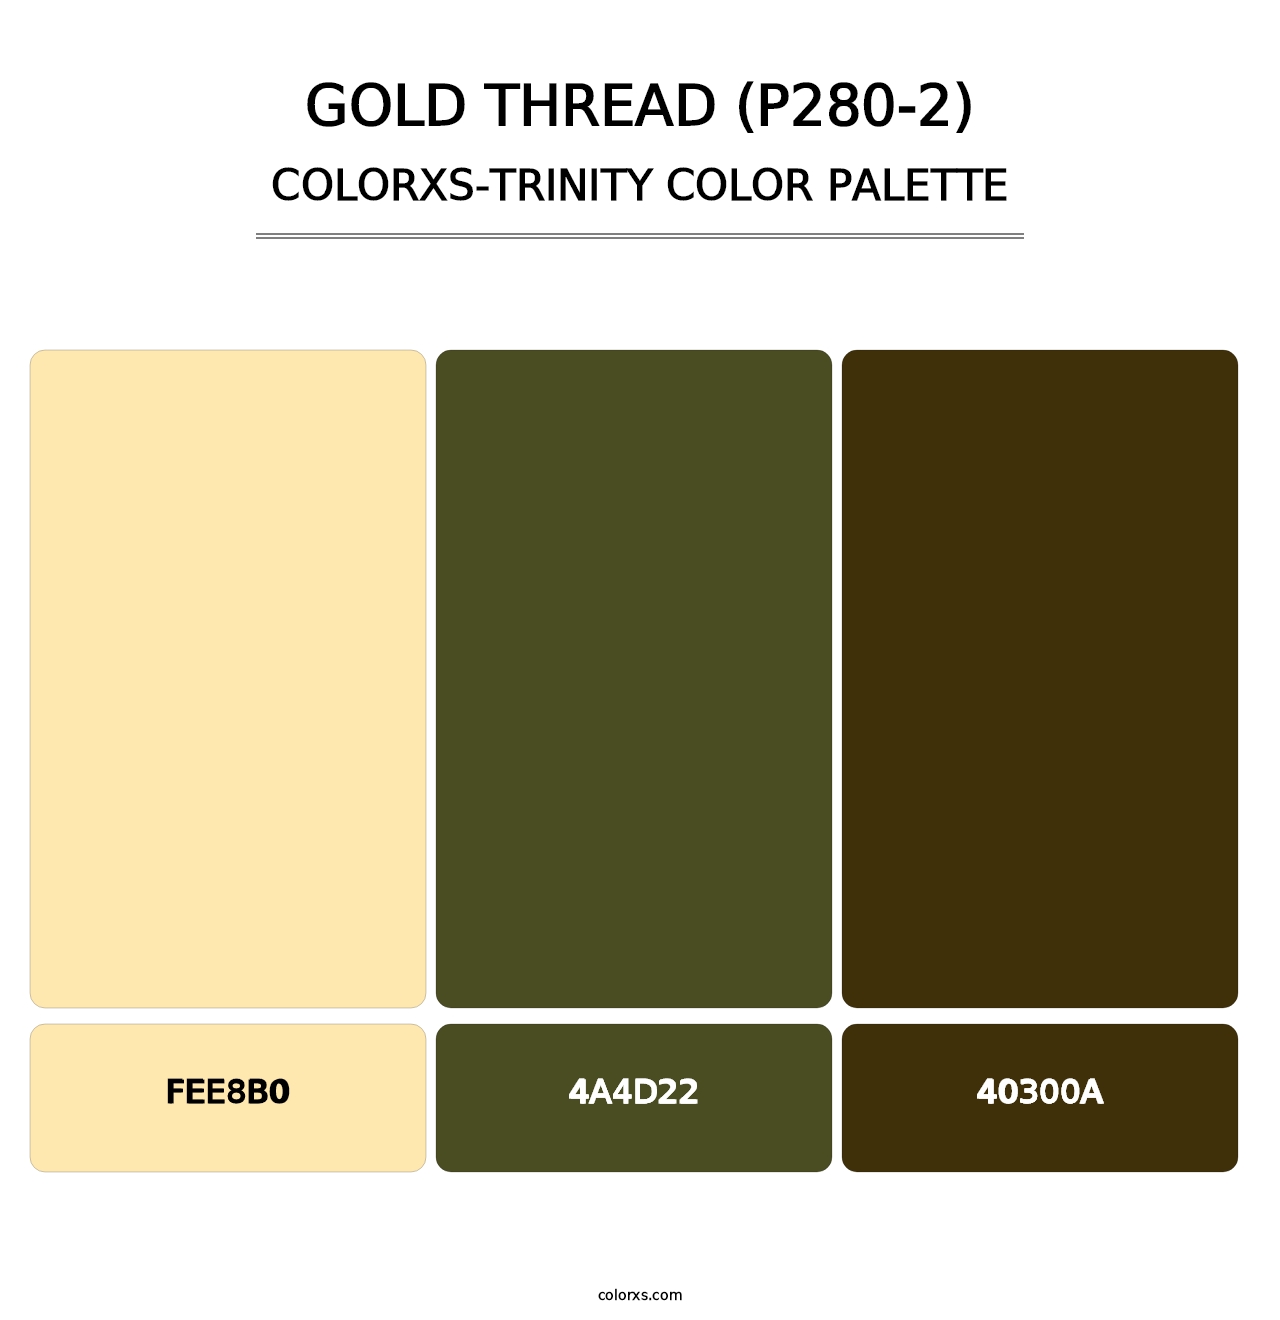 Gold Thread (P280-2) - Colorxs Trinity Palette